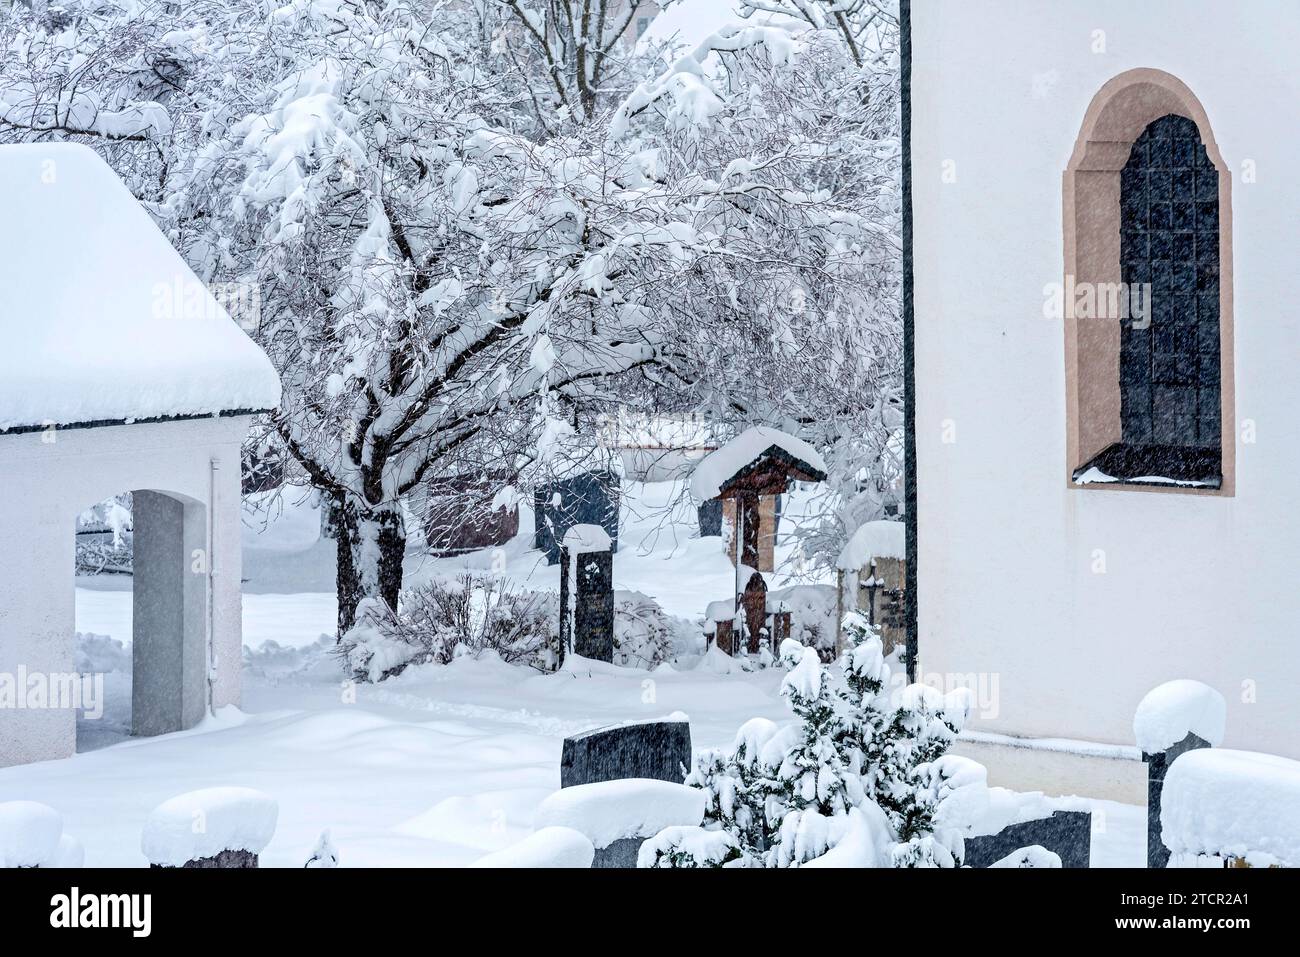 Cemetery at St Martin's parish church, late Middle Ages, snowed in, fresh snow, heavy snowfall, snow chaos, onset of winter, Marzling, Freising Stock Photo